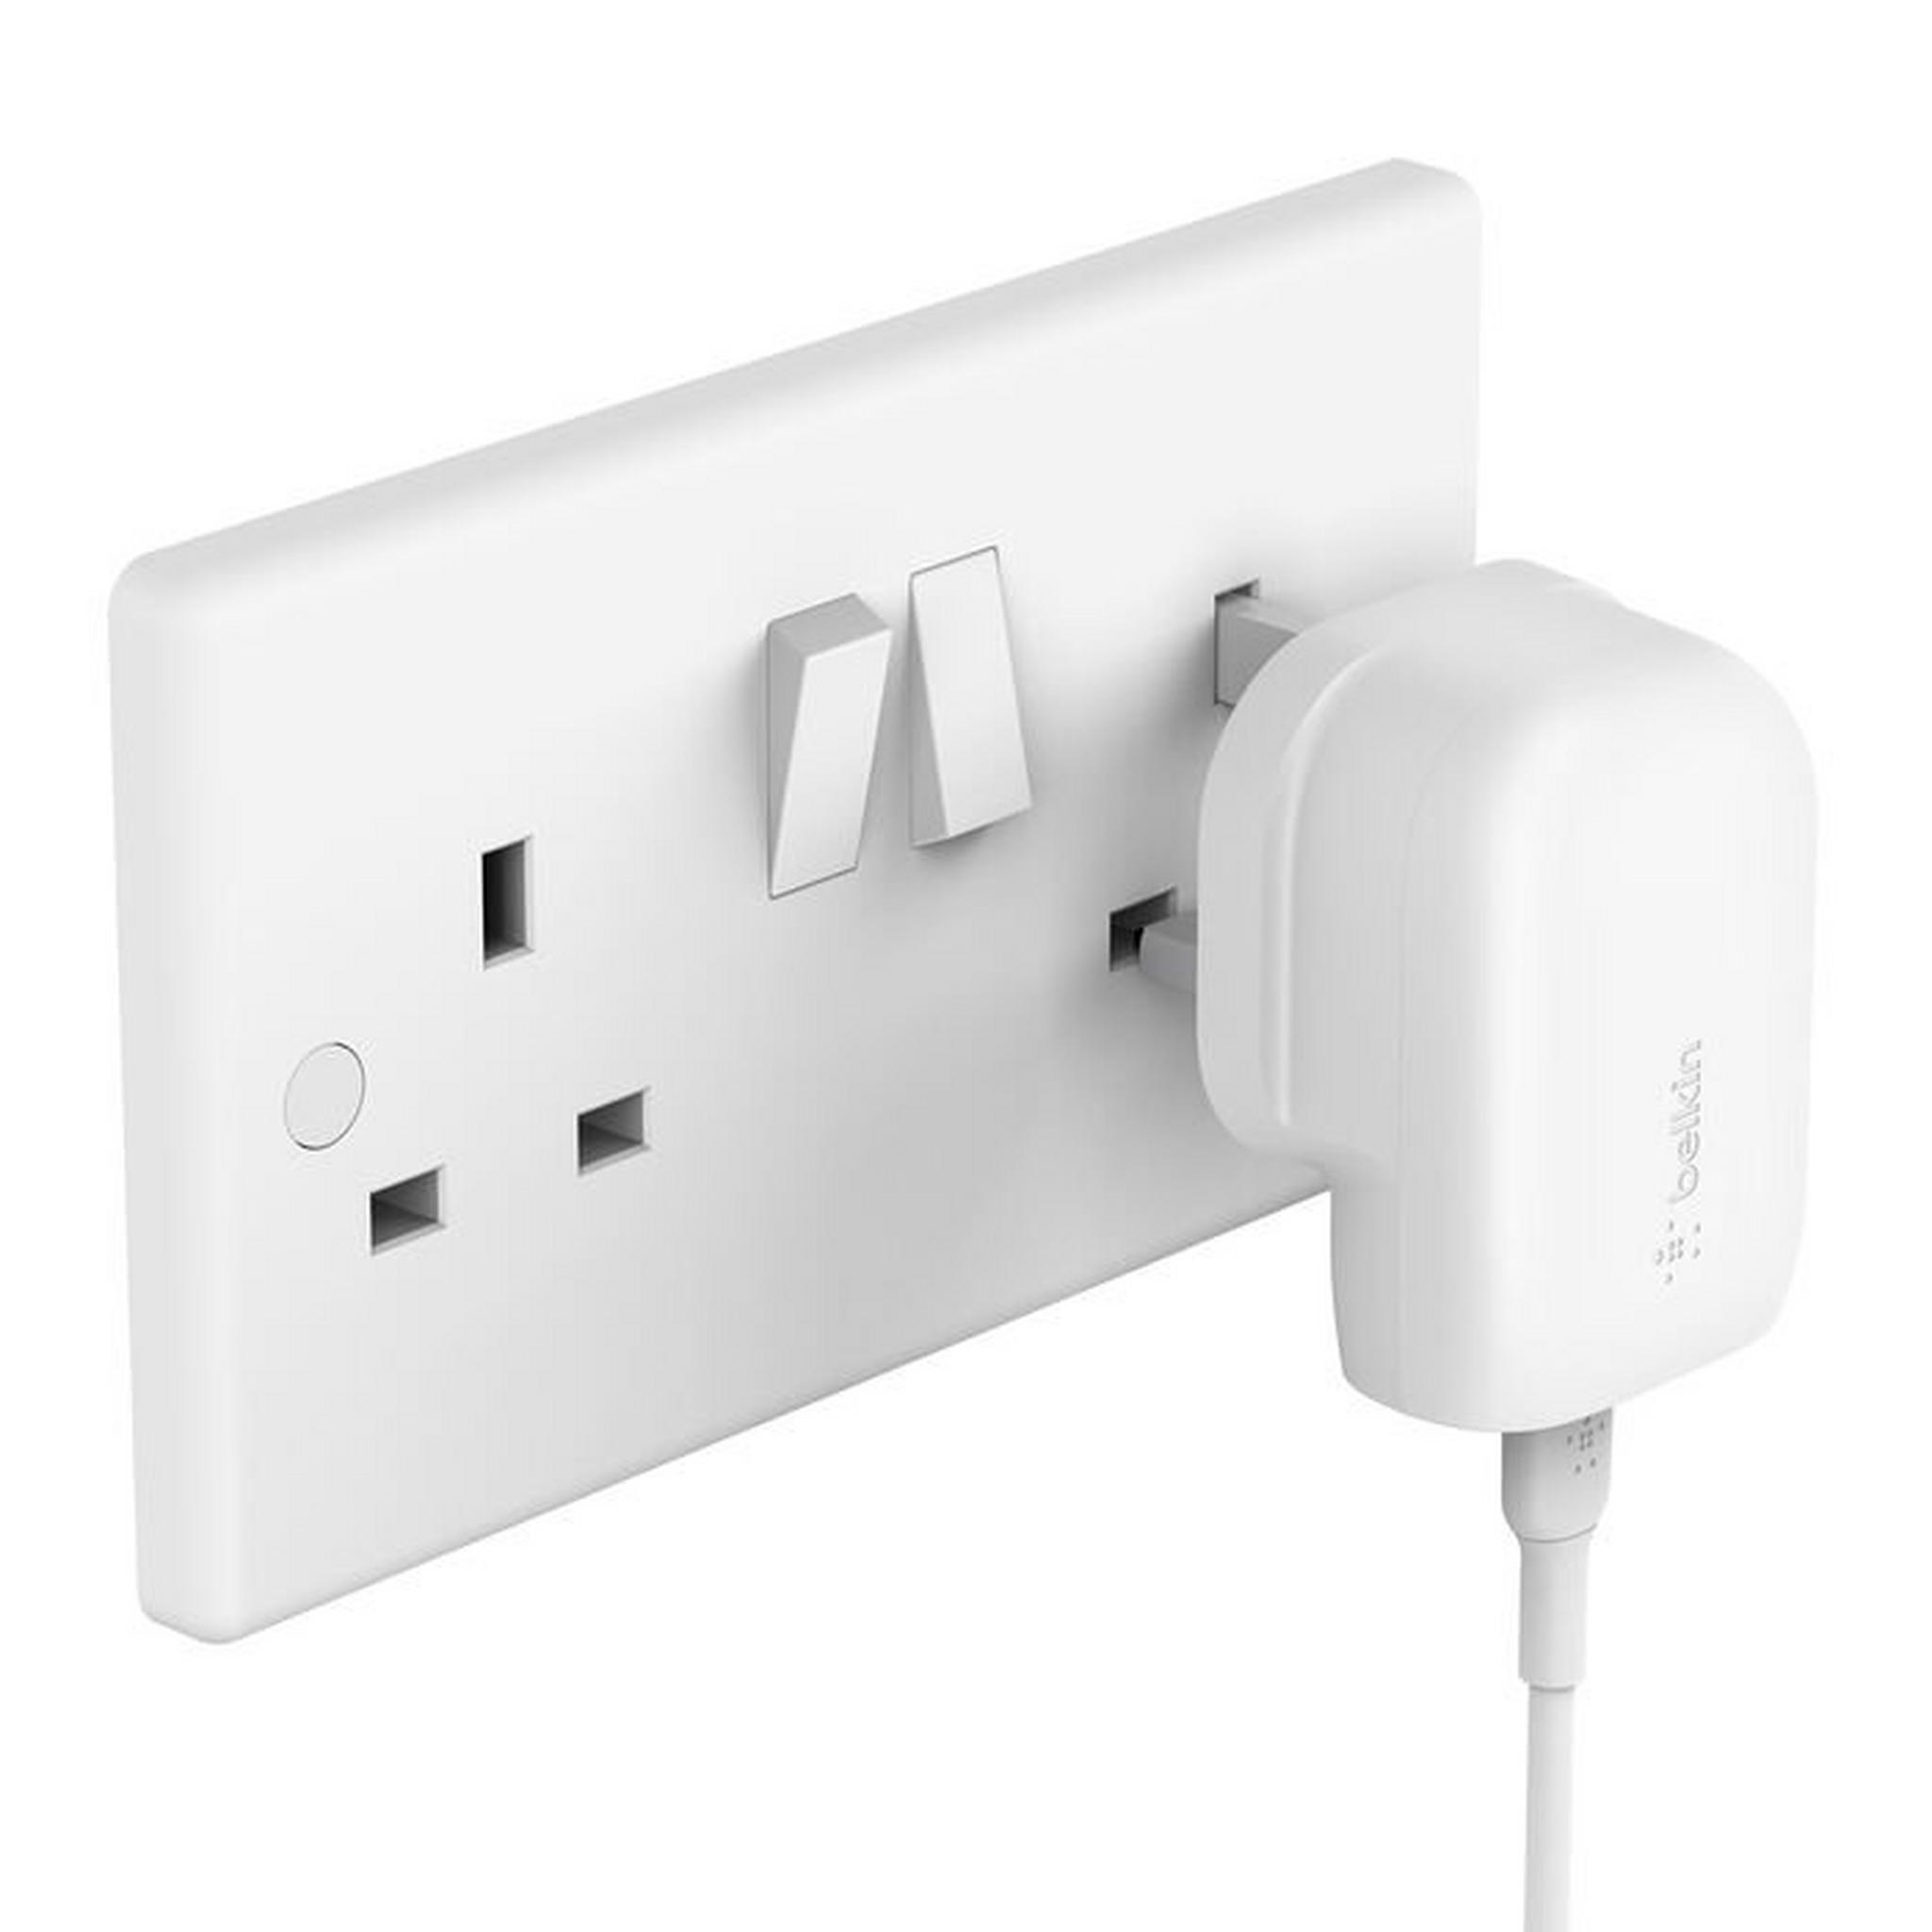 Belkin USB-C PD 3.0 PPS Wall Charger 30W + USB-C to USB-C Cable, WCA005MY1MWH-B6 – White